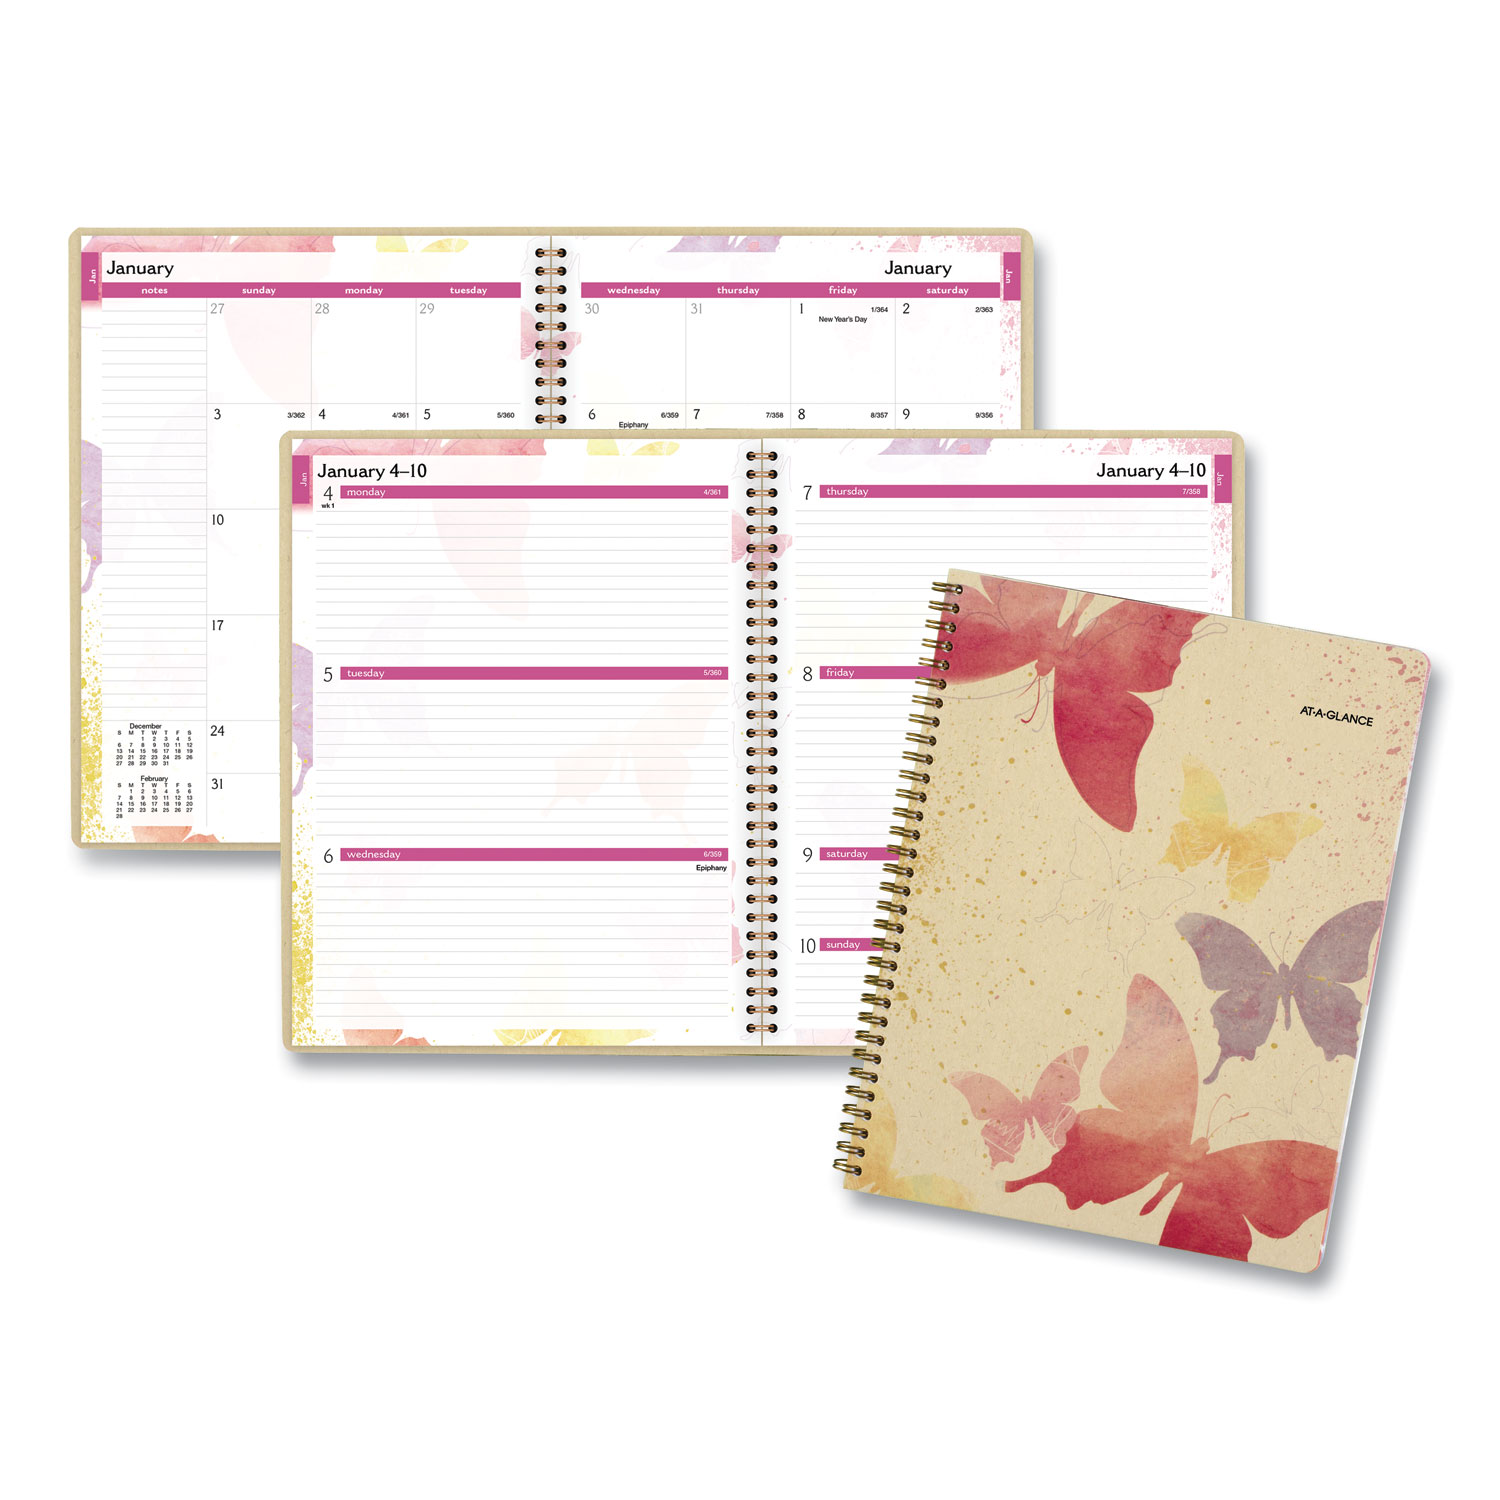  AT-A-GLANCE 791-905G Watercolors Weekly/Monthly Planner, 11 x 8 1/2, Watercolors, 2020-2021 (AAG791905G) 